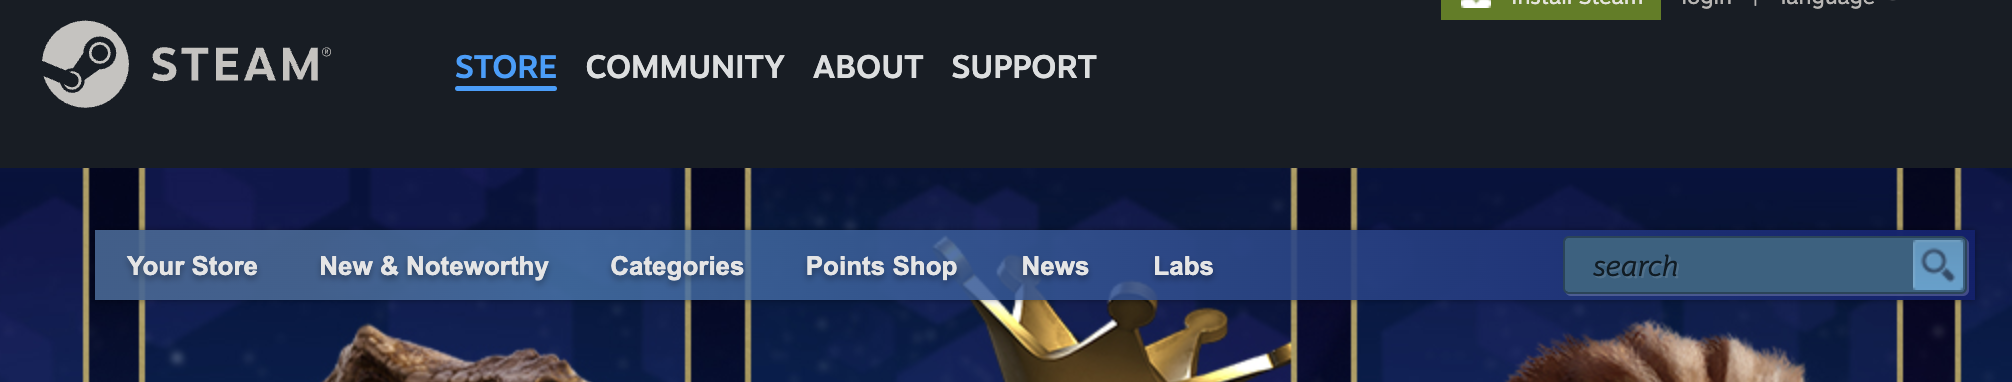 The store page navigation persists across much of the store subpages